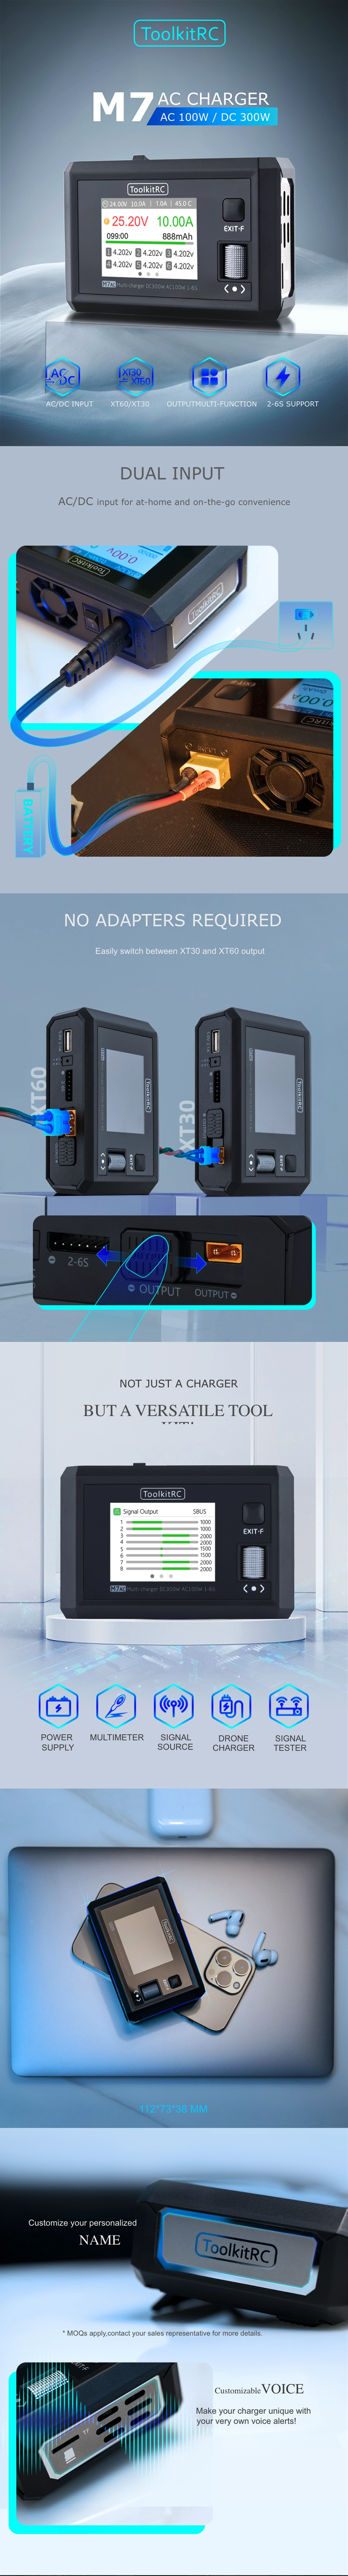 ToolkitRC M7 Multi-Function AC Smart Charger Infographic